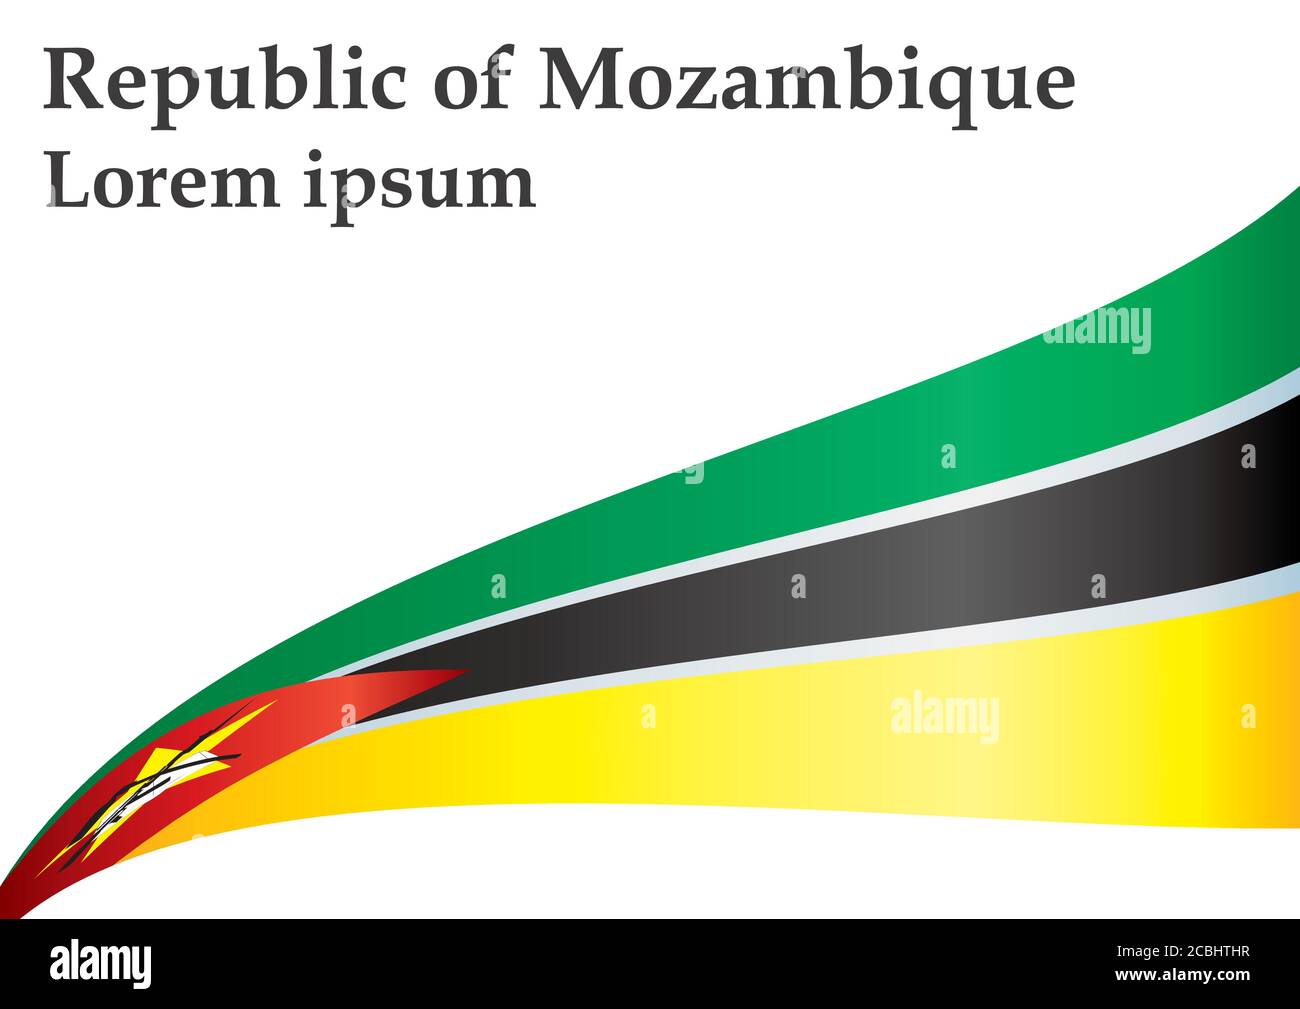 Flag of Mozambique, Republic of Mozambique. Template for award design, an official document with the flag of Mozambique. Bright, colorful vector illus Stock Vector